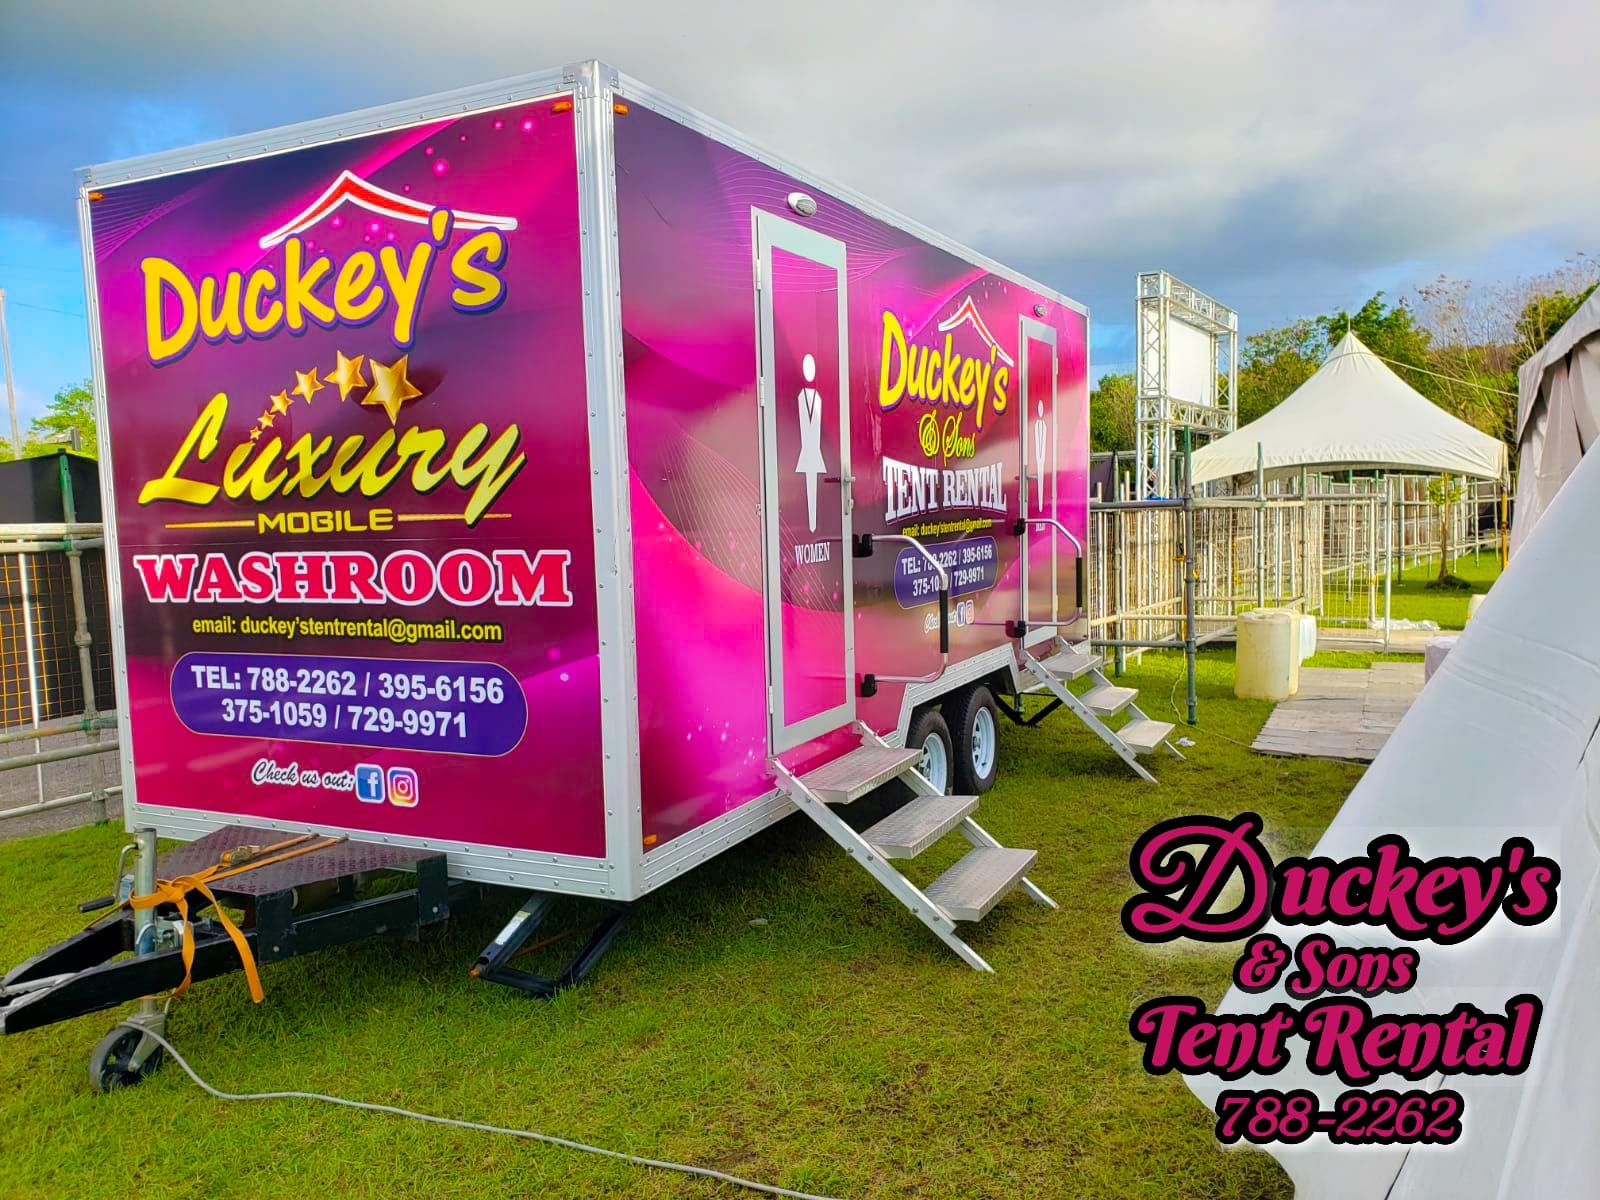 Duckey's & Sons Tent Rental - TENTS